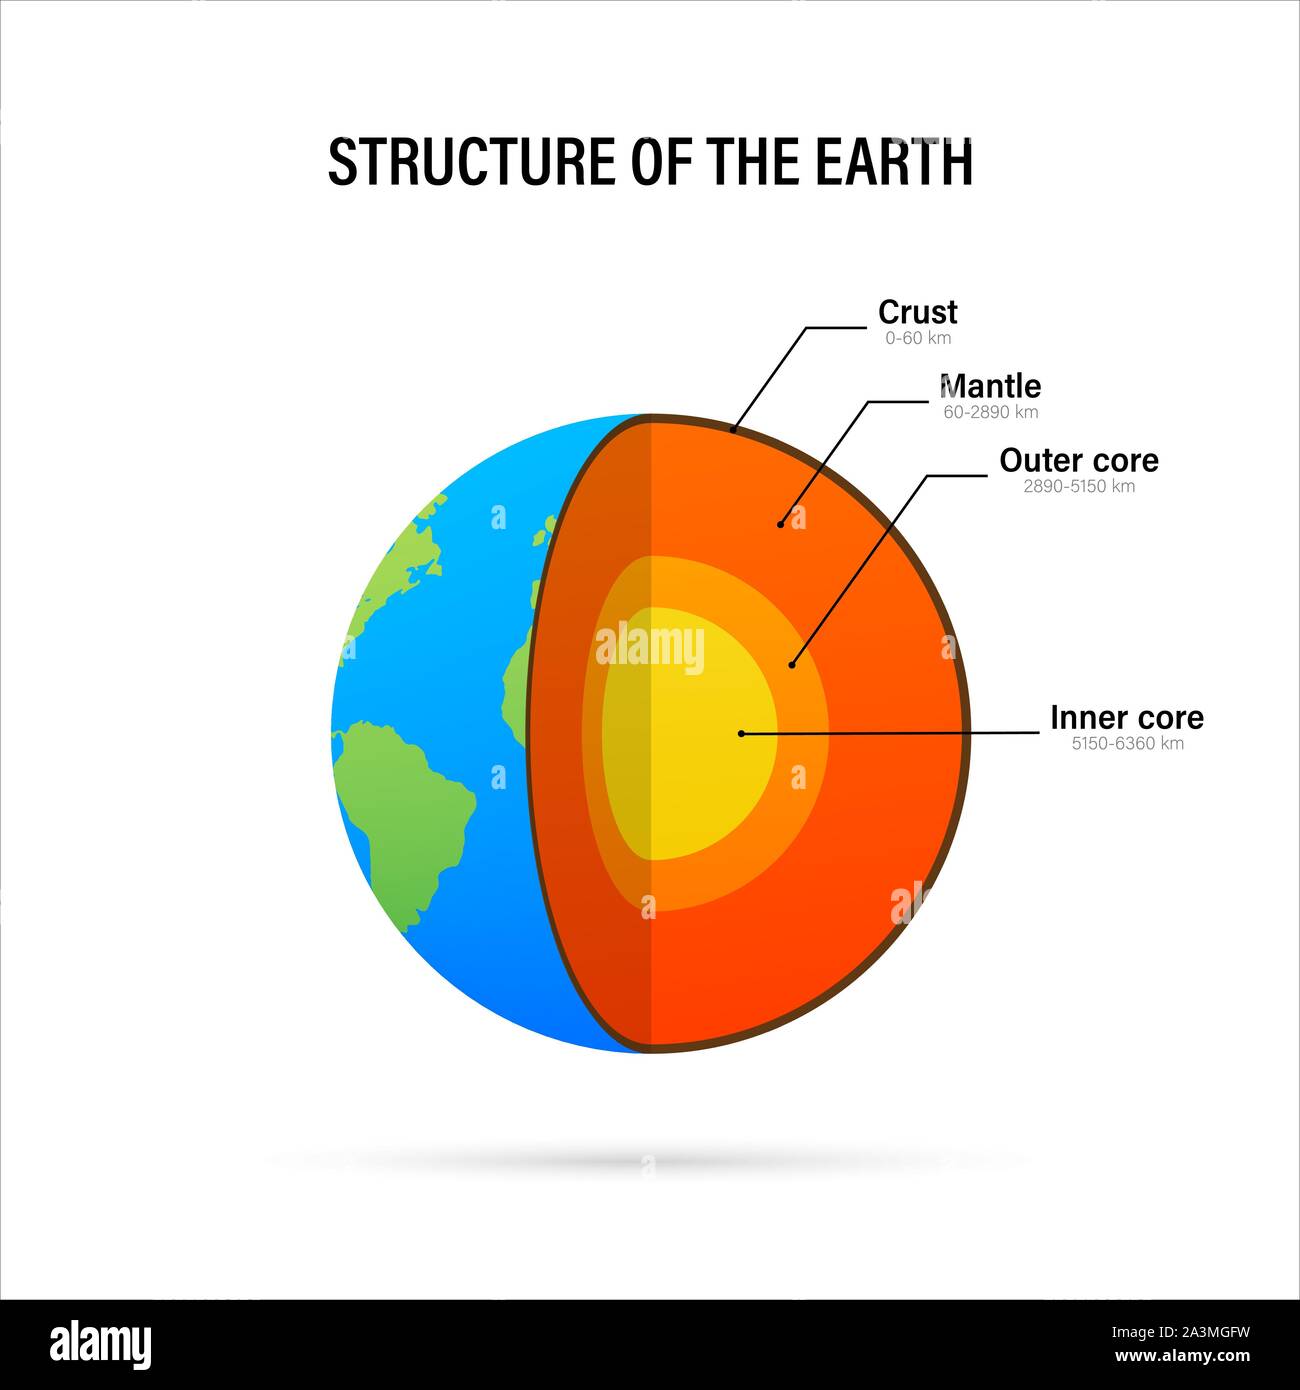 Structure of the earth - cross section with accurate layers of the earth's interior, description, depth in kilometers. Vector illustration. Stock Vector